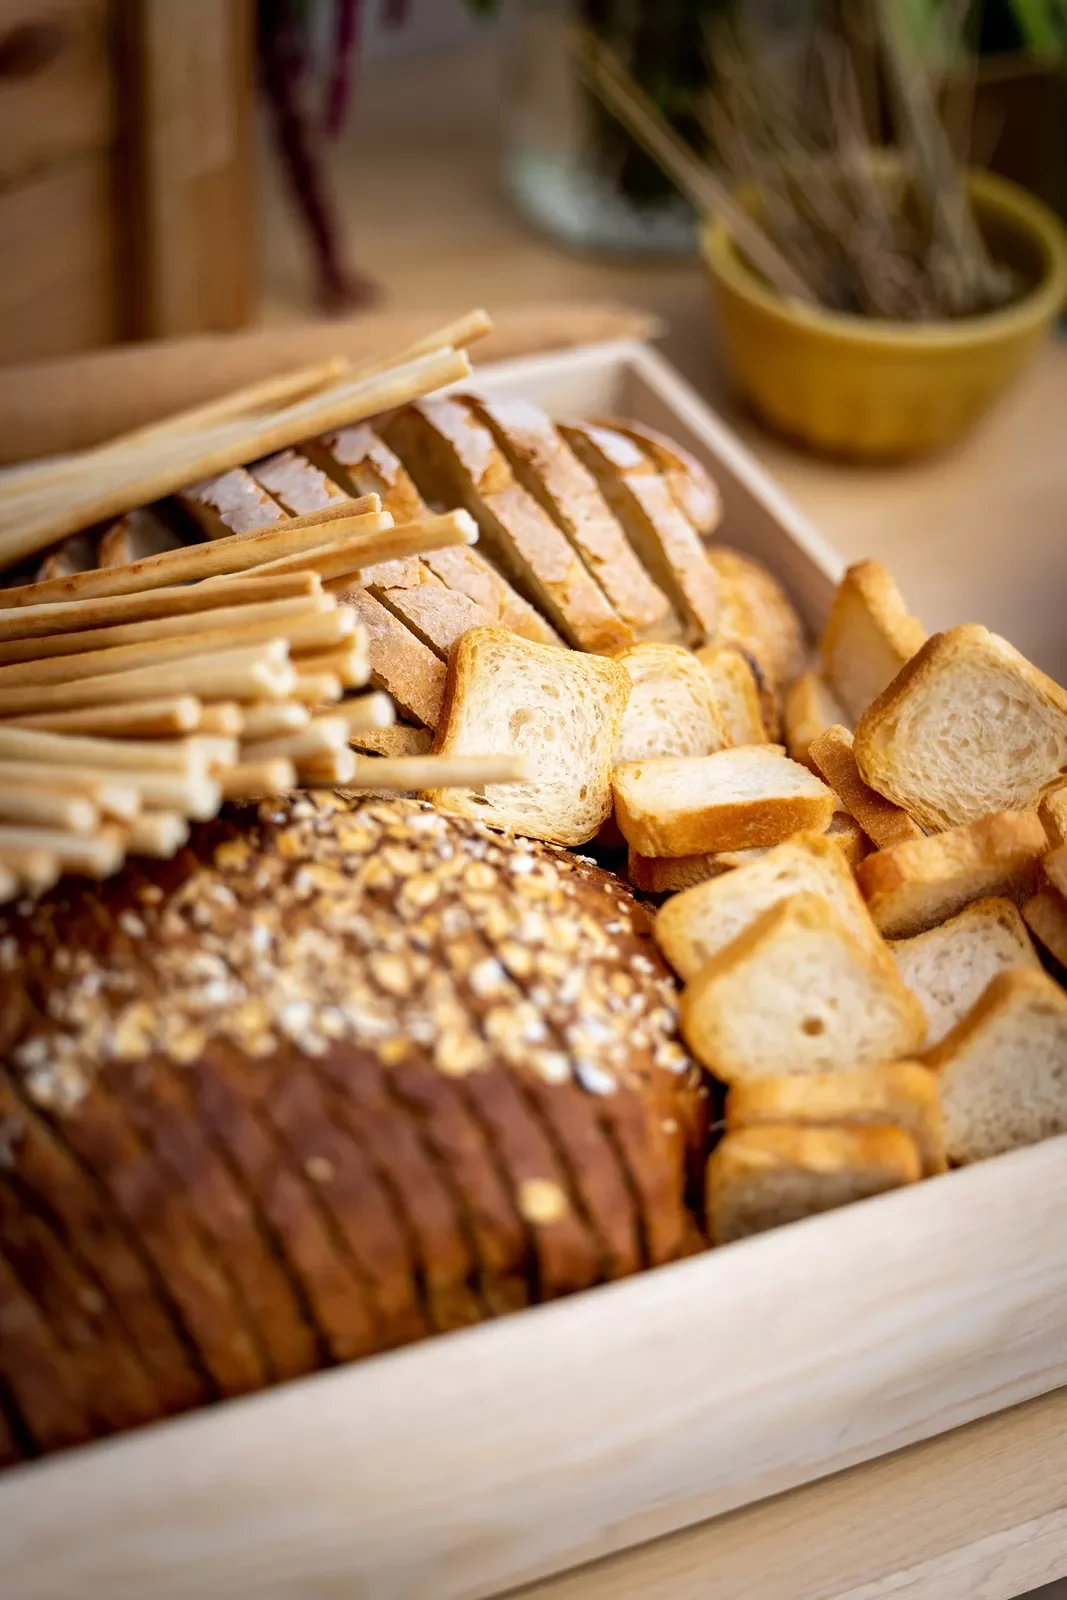 Platter of bread and crackers.